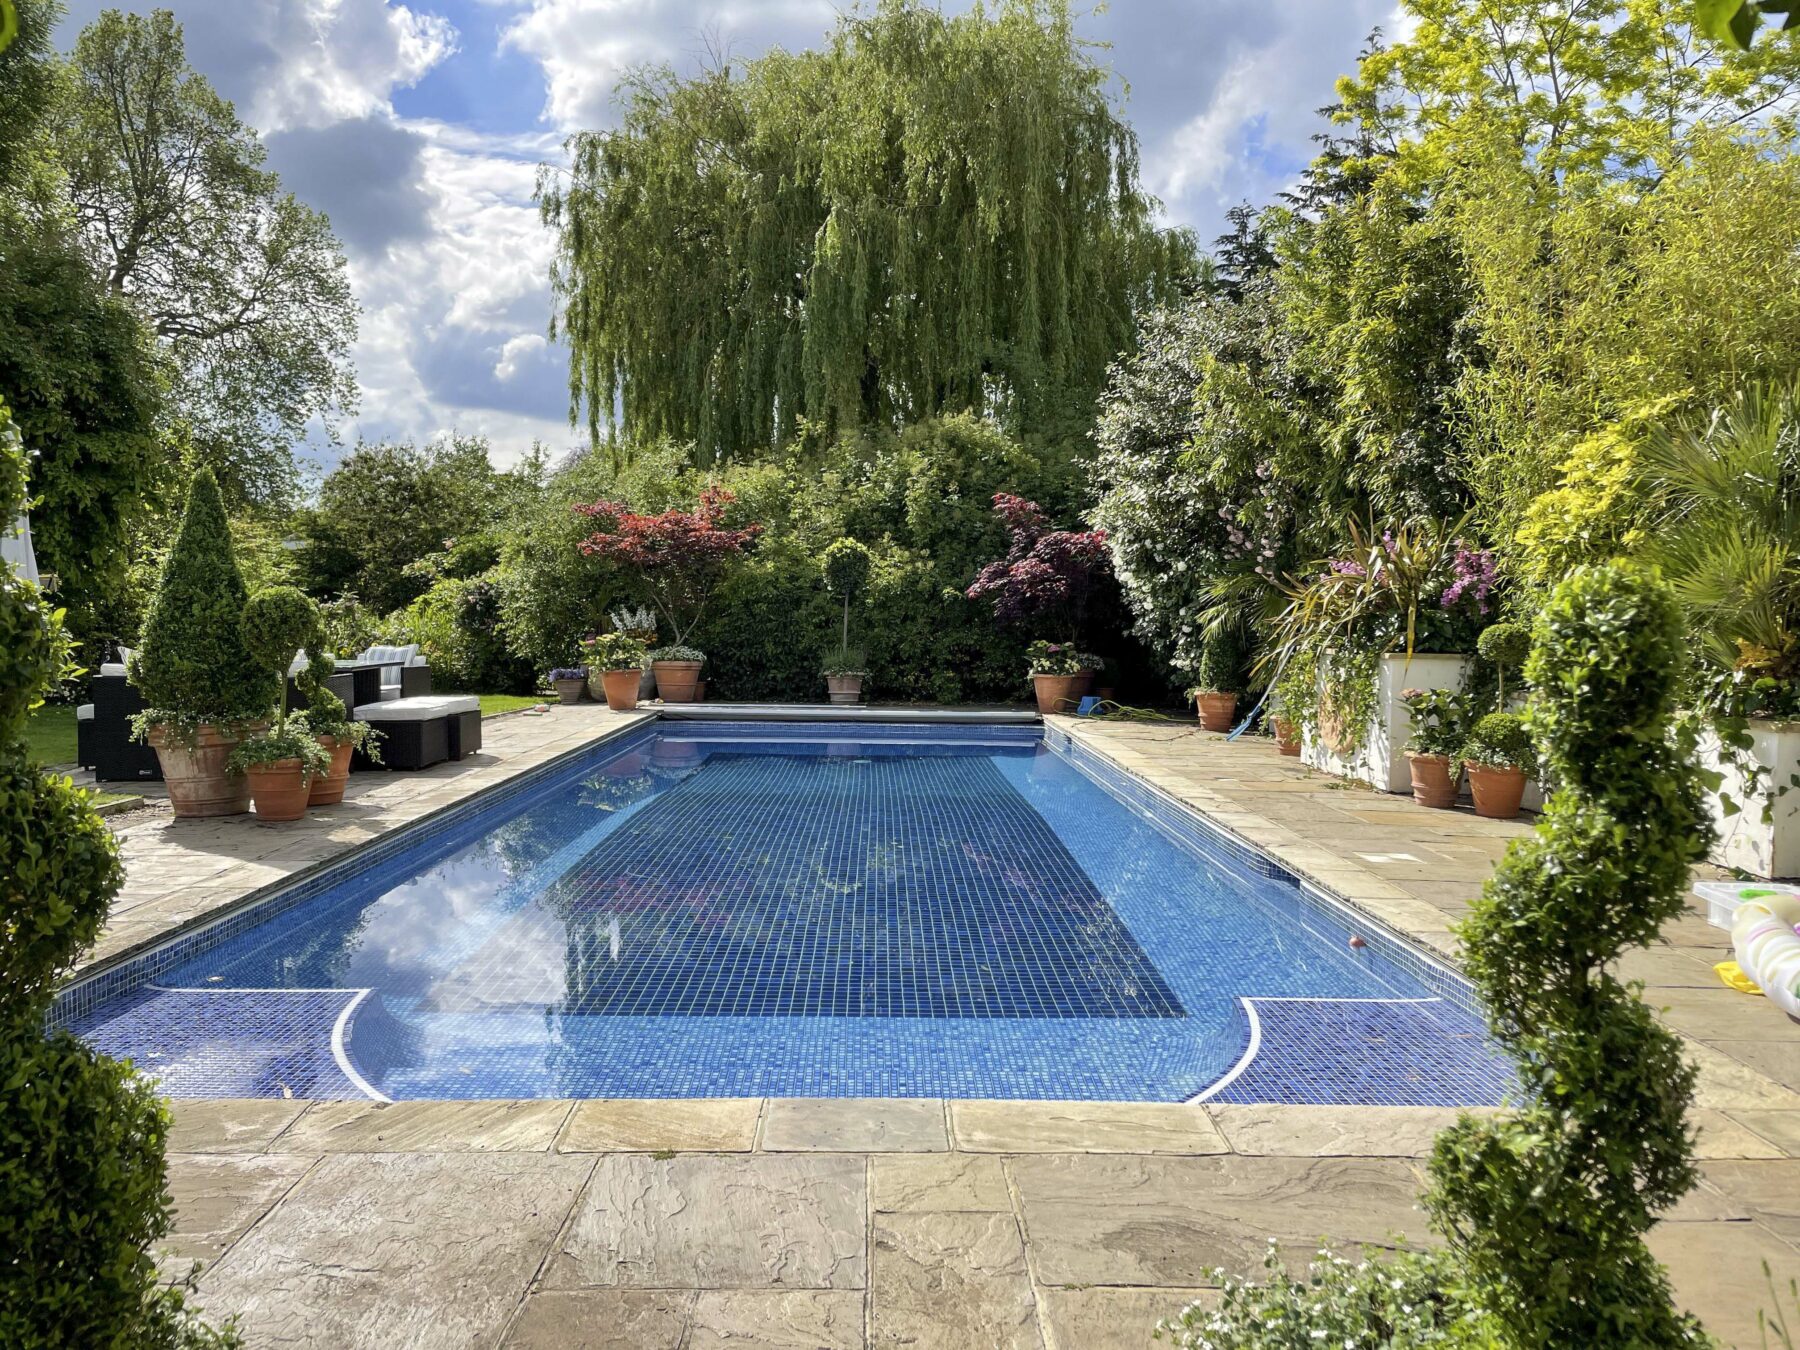 Garden plants manicured mosaic swimming pool trees furniture TV filming location hire lodge London 17